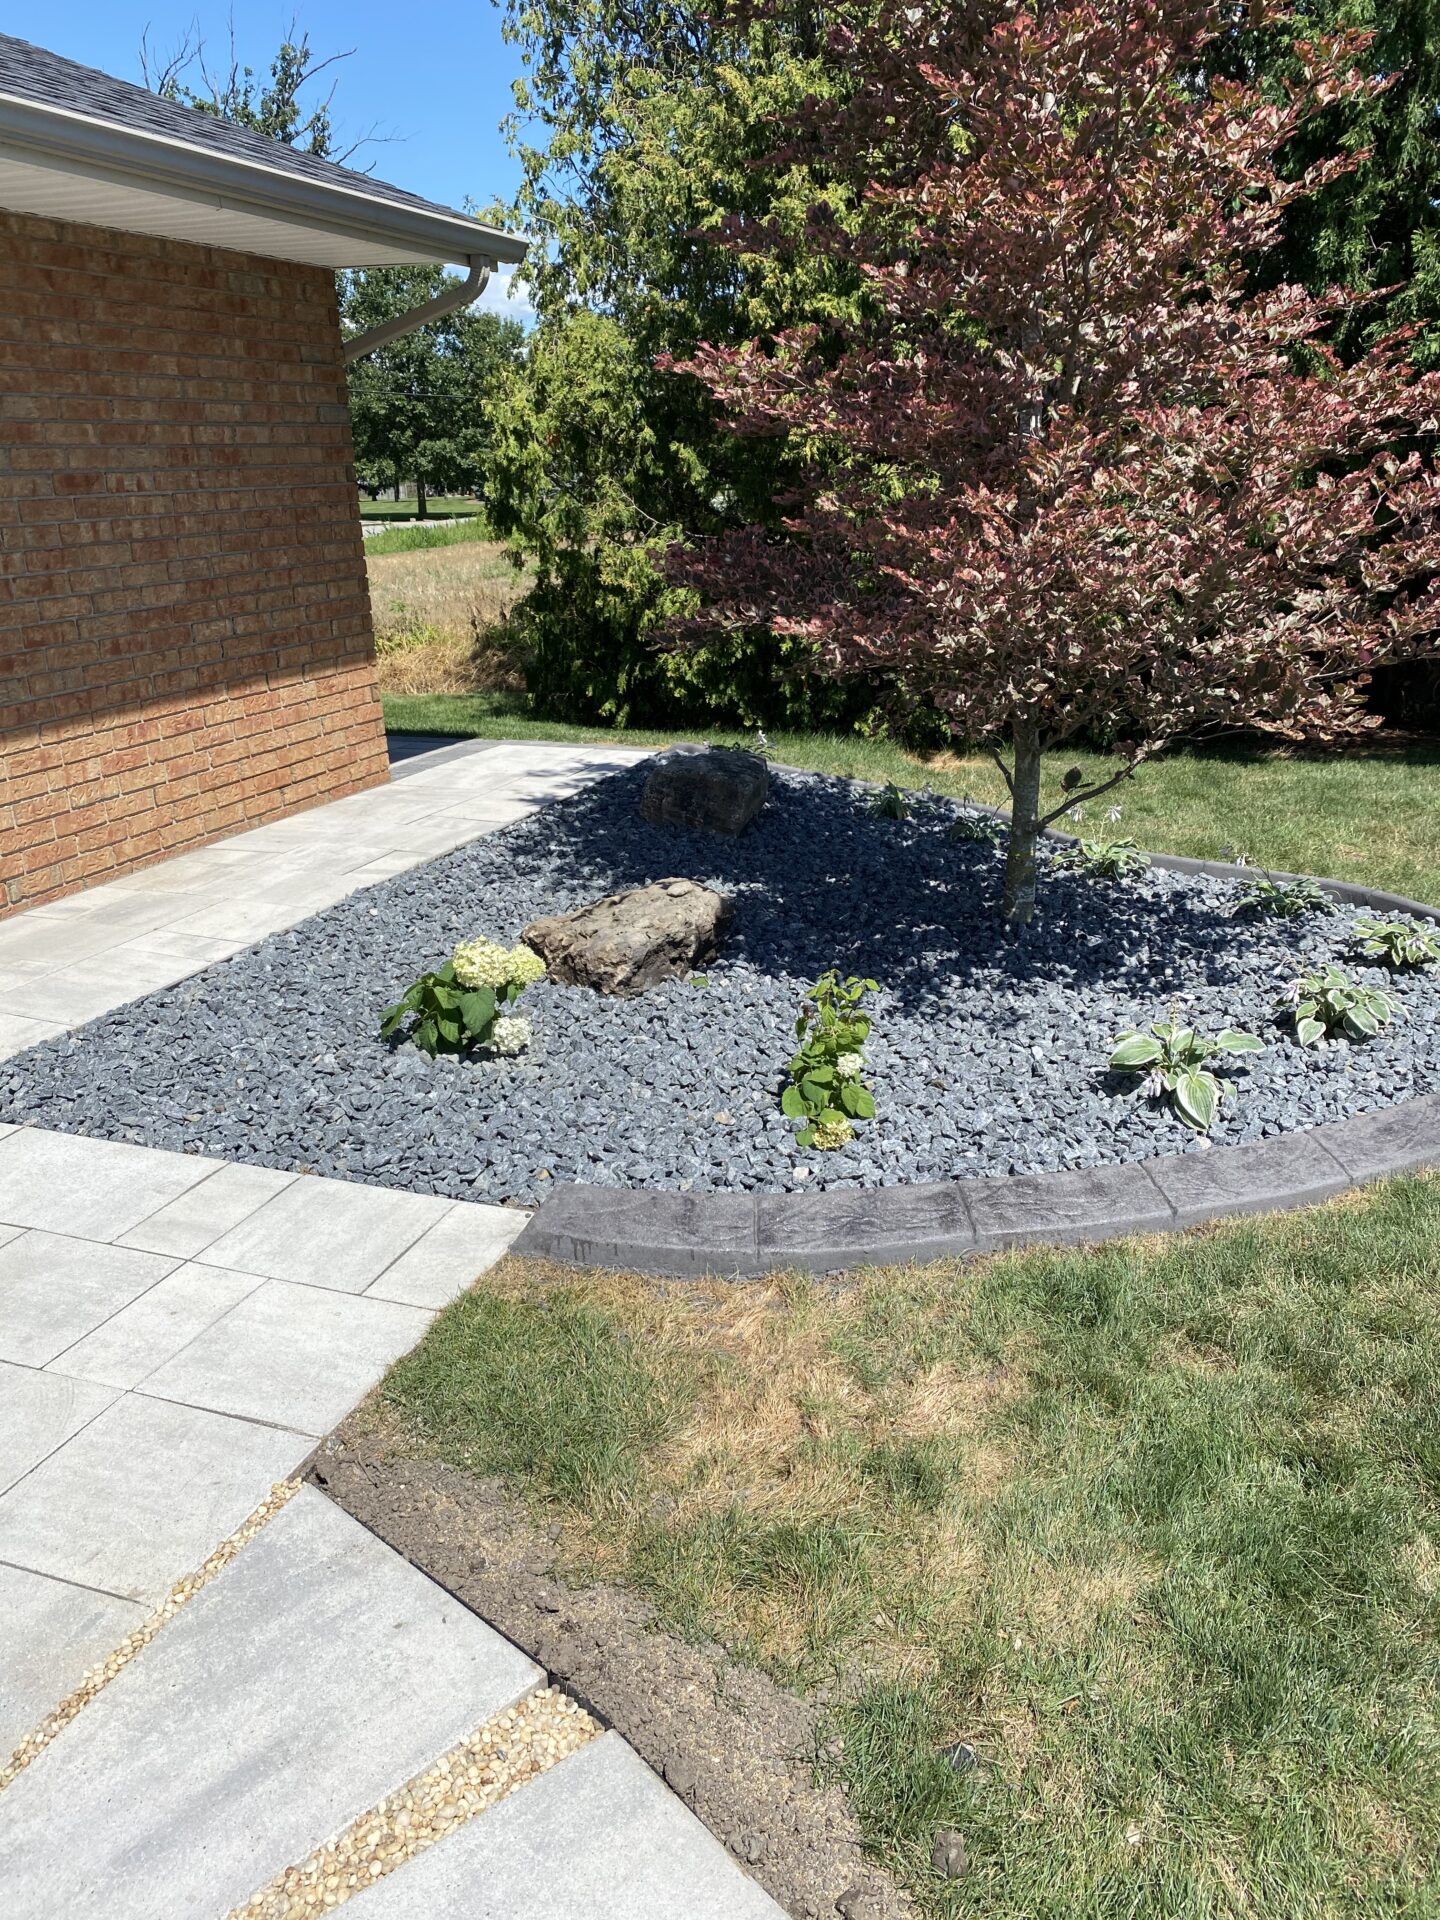 The image shows a landscaped garden with a red brick house, a stone walkway, a mulched area with young plants, a red leafy tree, and blue-gray stones.